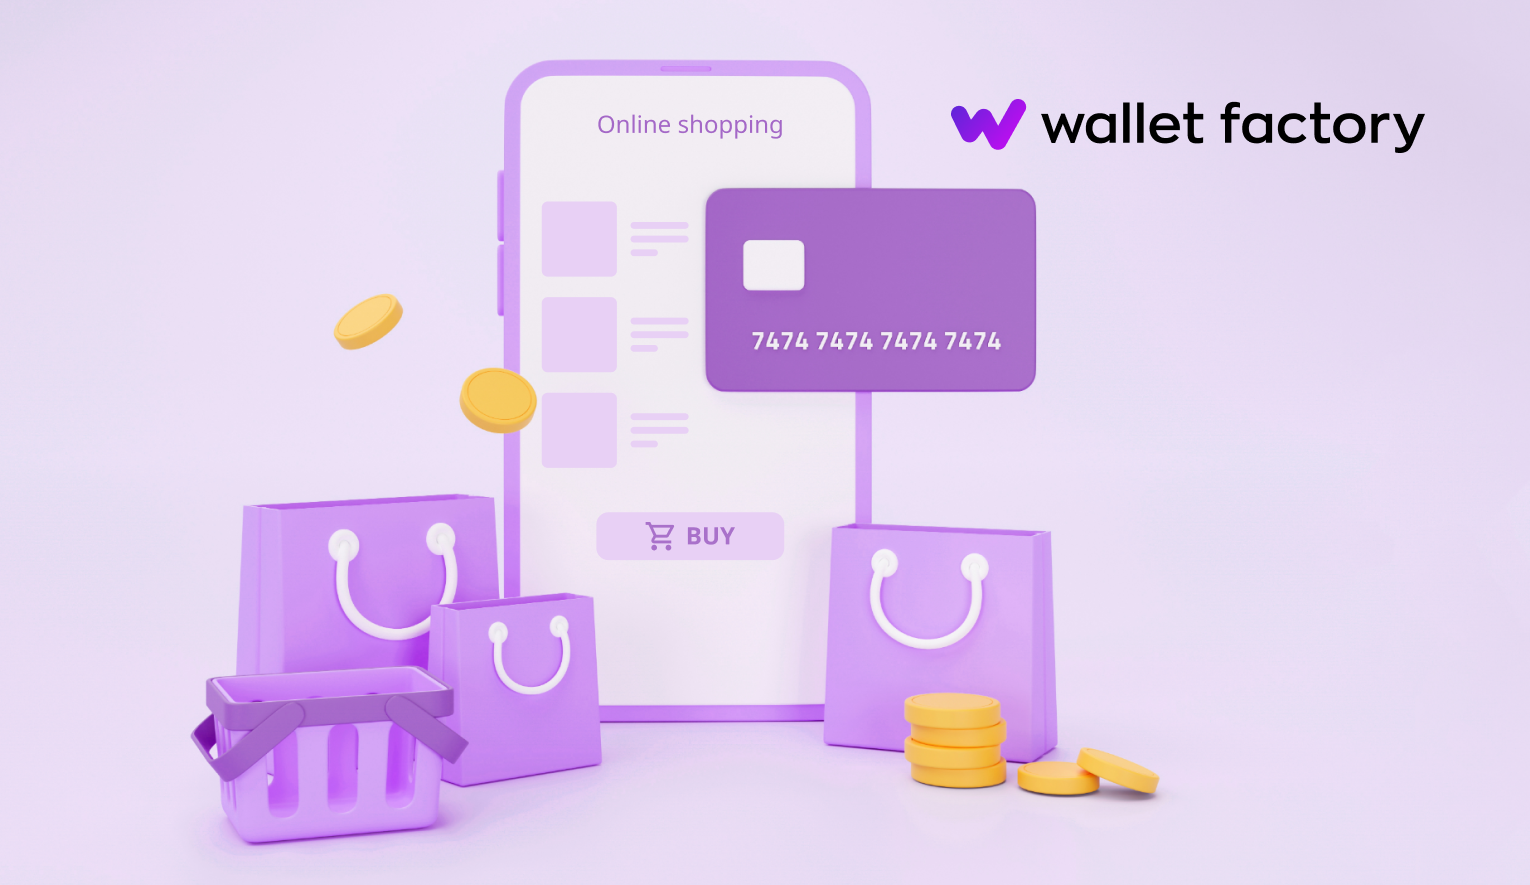 Digital wallets - Amazon Payment Services